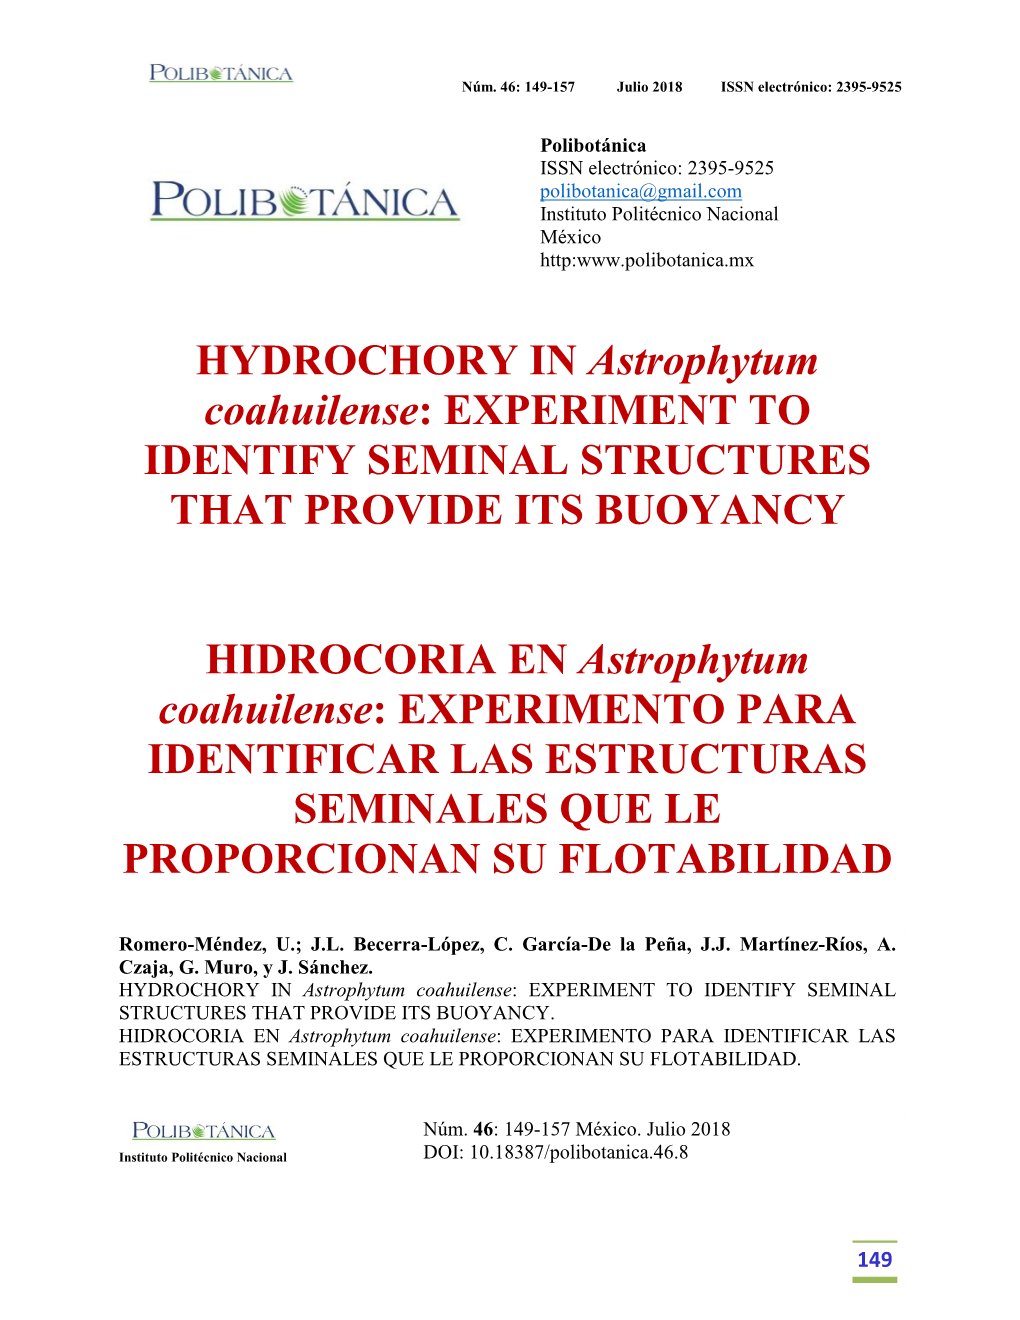 HYDROCHORY in Astrophytum Coahuilense: EXPERIMENT to IDENTIFY SEMINAL STRUCTURES THAT PROVIDE ITS BUOYANCY